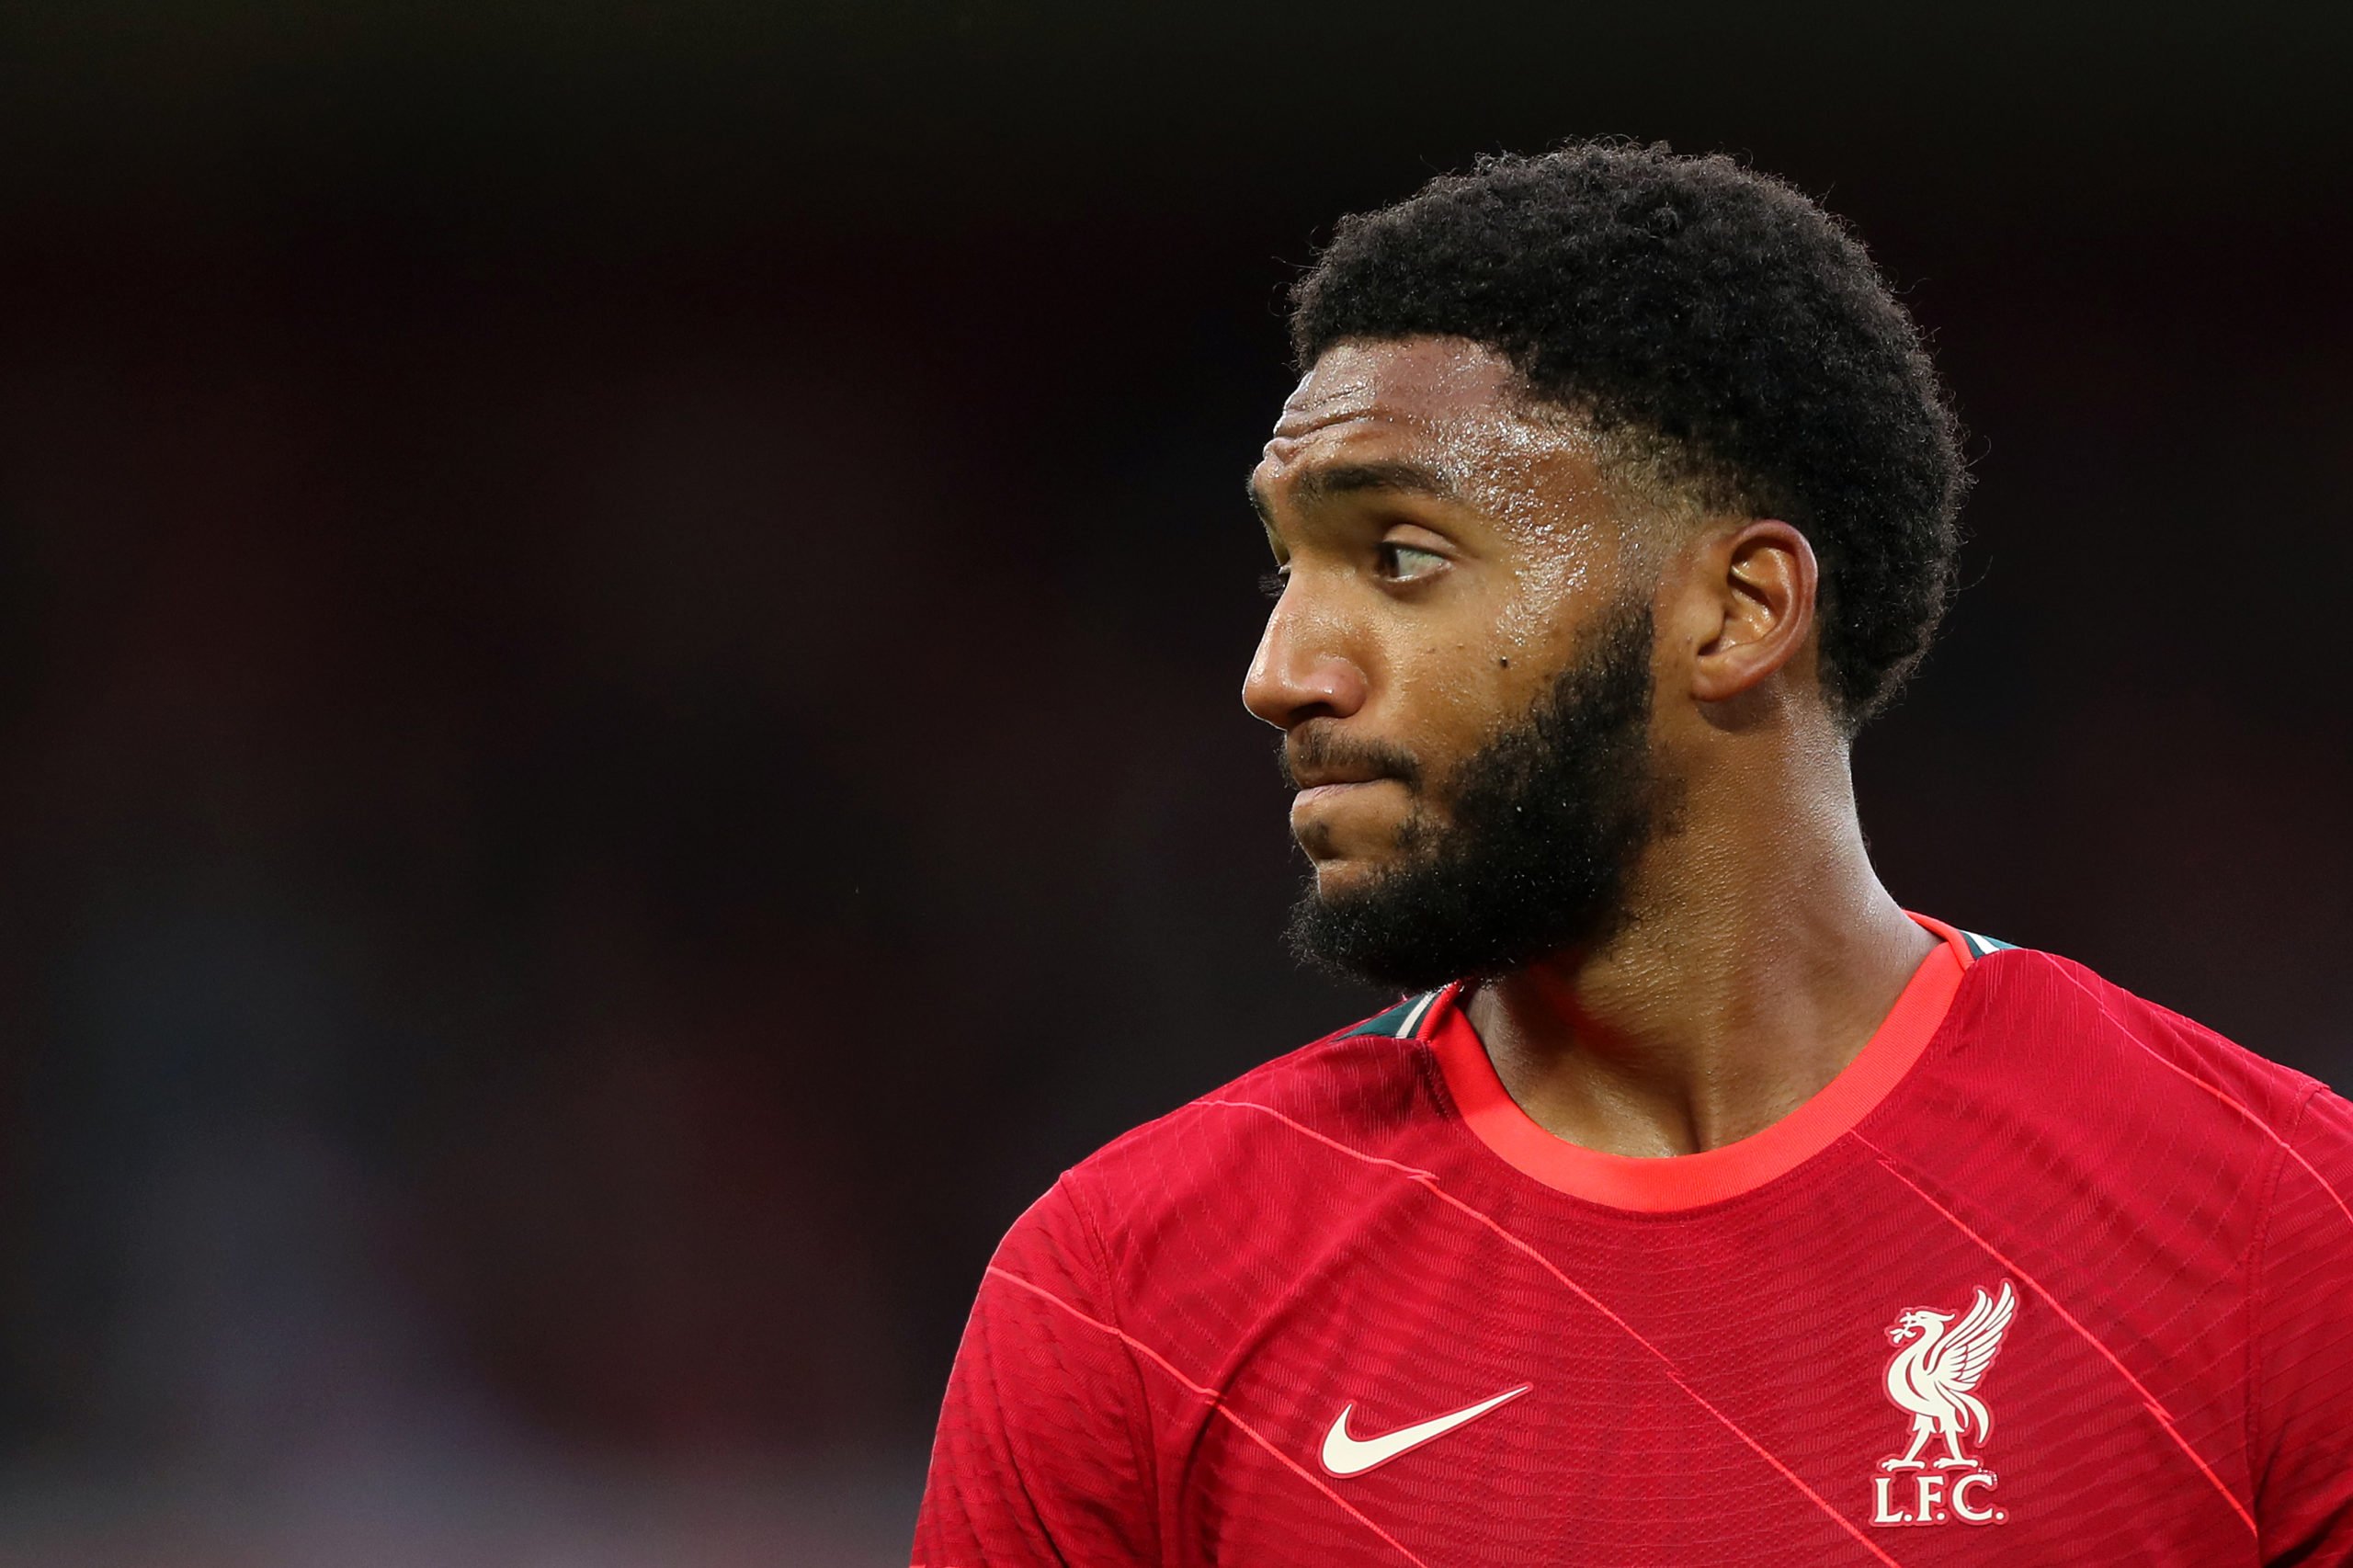 LIVERPOOL, ENGLAND - AUGUST 09: Joe Gomez of Liverpool looks on during the Pre-Season Friendly match between Liverpool and Osasuna at Anfield on August 09, 2021 in Liverpool, England. (Photo by Lewis Storey/Getty Images)https://the4thofficial.net/2021/12/liverpool-join-the-race-for-this-wolves-starlet-should-the-reds-pursue-a-deal/